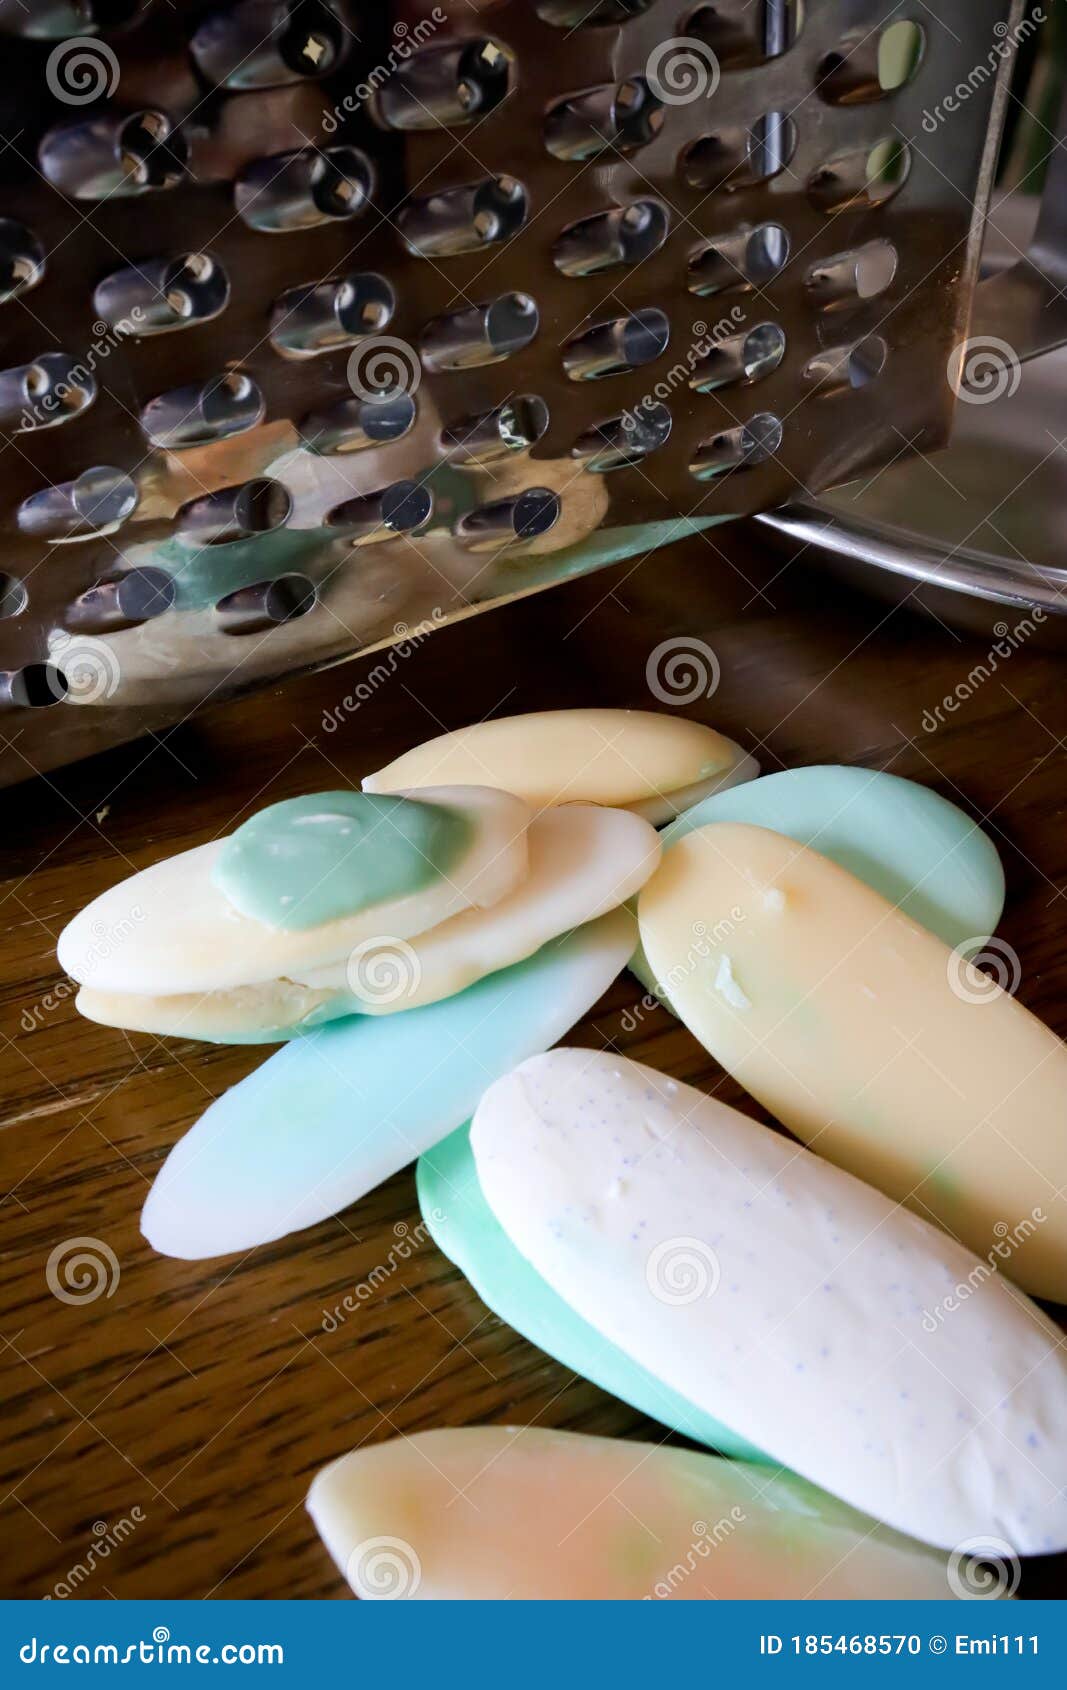 https://thumbs.dreamstime.com/z/soaps-remnants-wooden-table-metal-grater-dish-preparation-grated-soap-lot-solid-hygiene-cleanliness-different-185468570.jpg